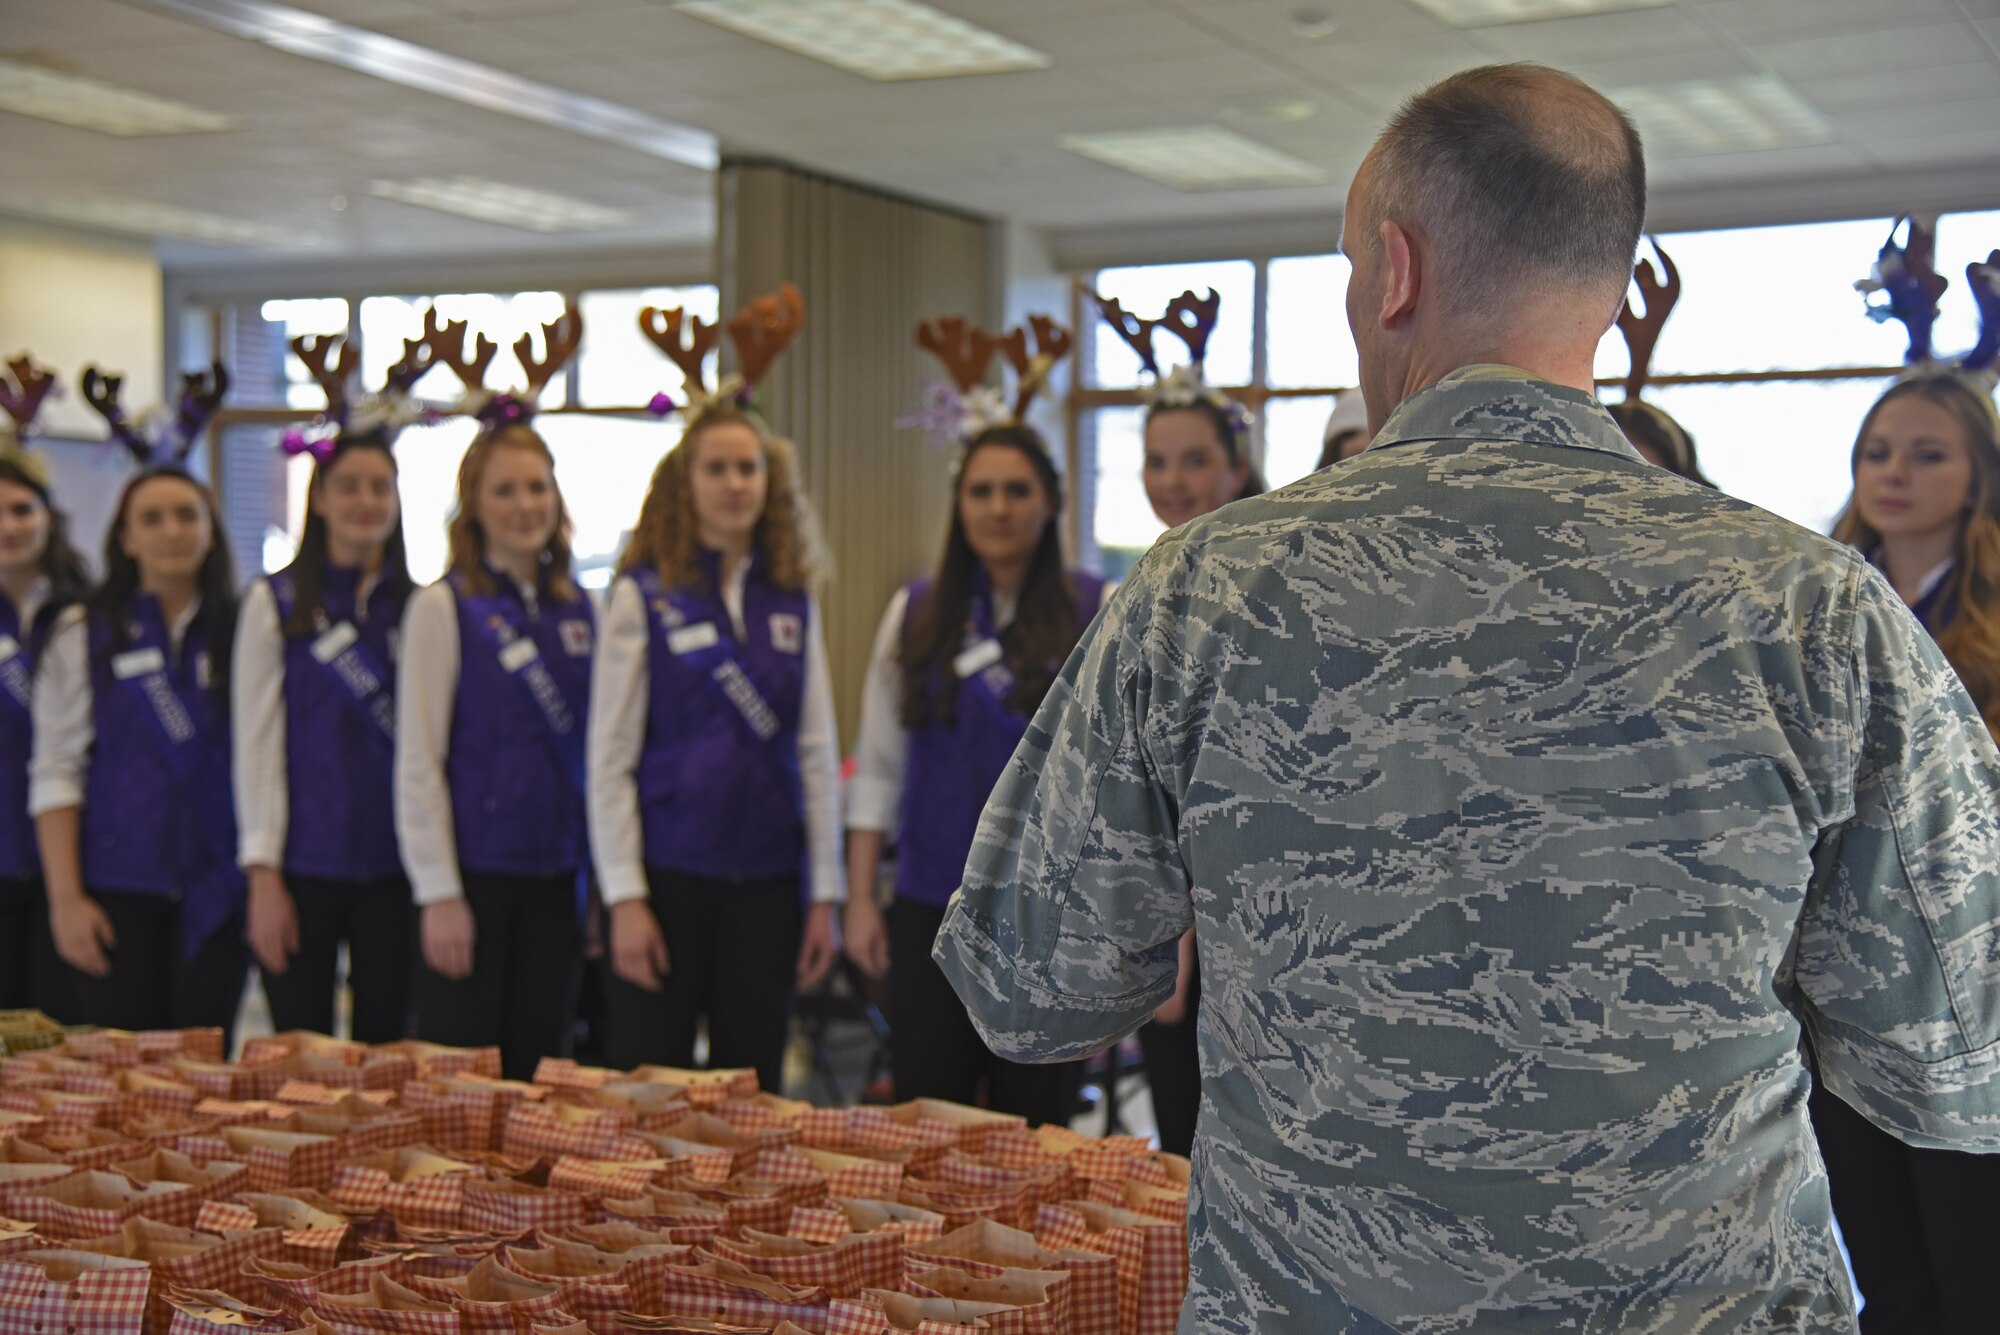 Col. Ryan Samuelson, 92nd Air Refueling Wing commander, speaks with 14 Spokane Lilac Festival Princesses during the annual Operation Cookie Drop Dec. 6, 2016, at Fairchild Air Force Base. The Lilac Princesses were joined by the Officer’s Spouses Club in packing more than 500 bags for Airmen living in the dormitories. (U.S. Air Force photo/Senior Airman Mackenzie Richardson)